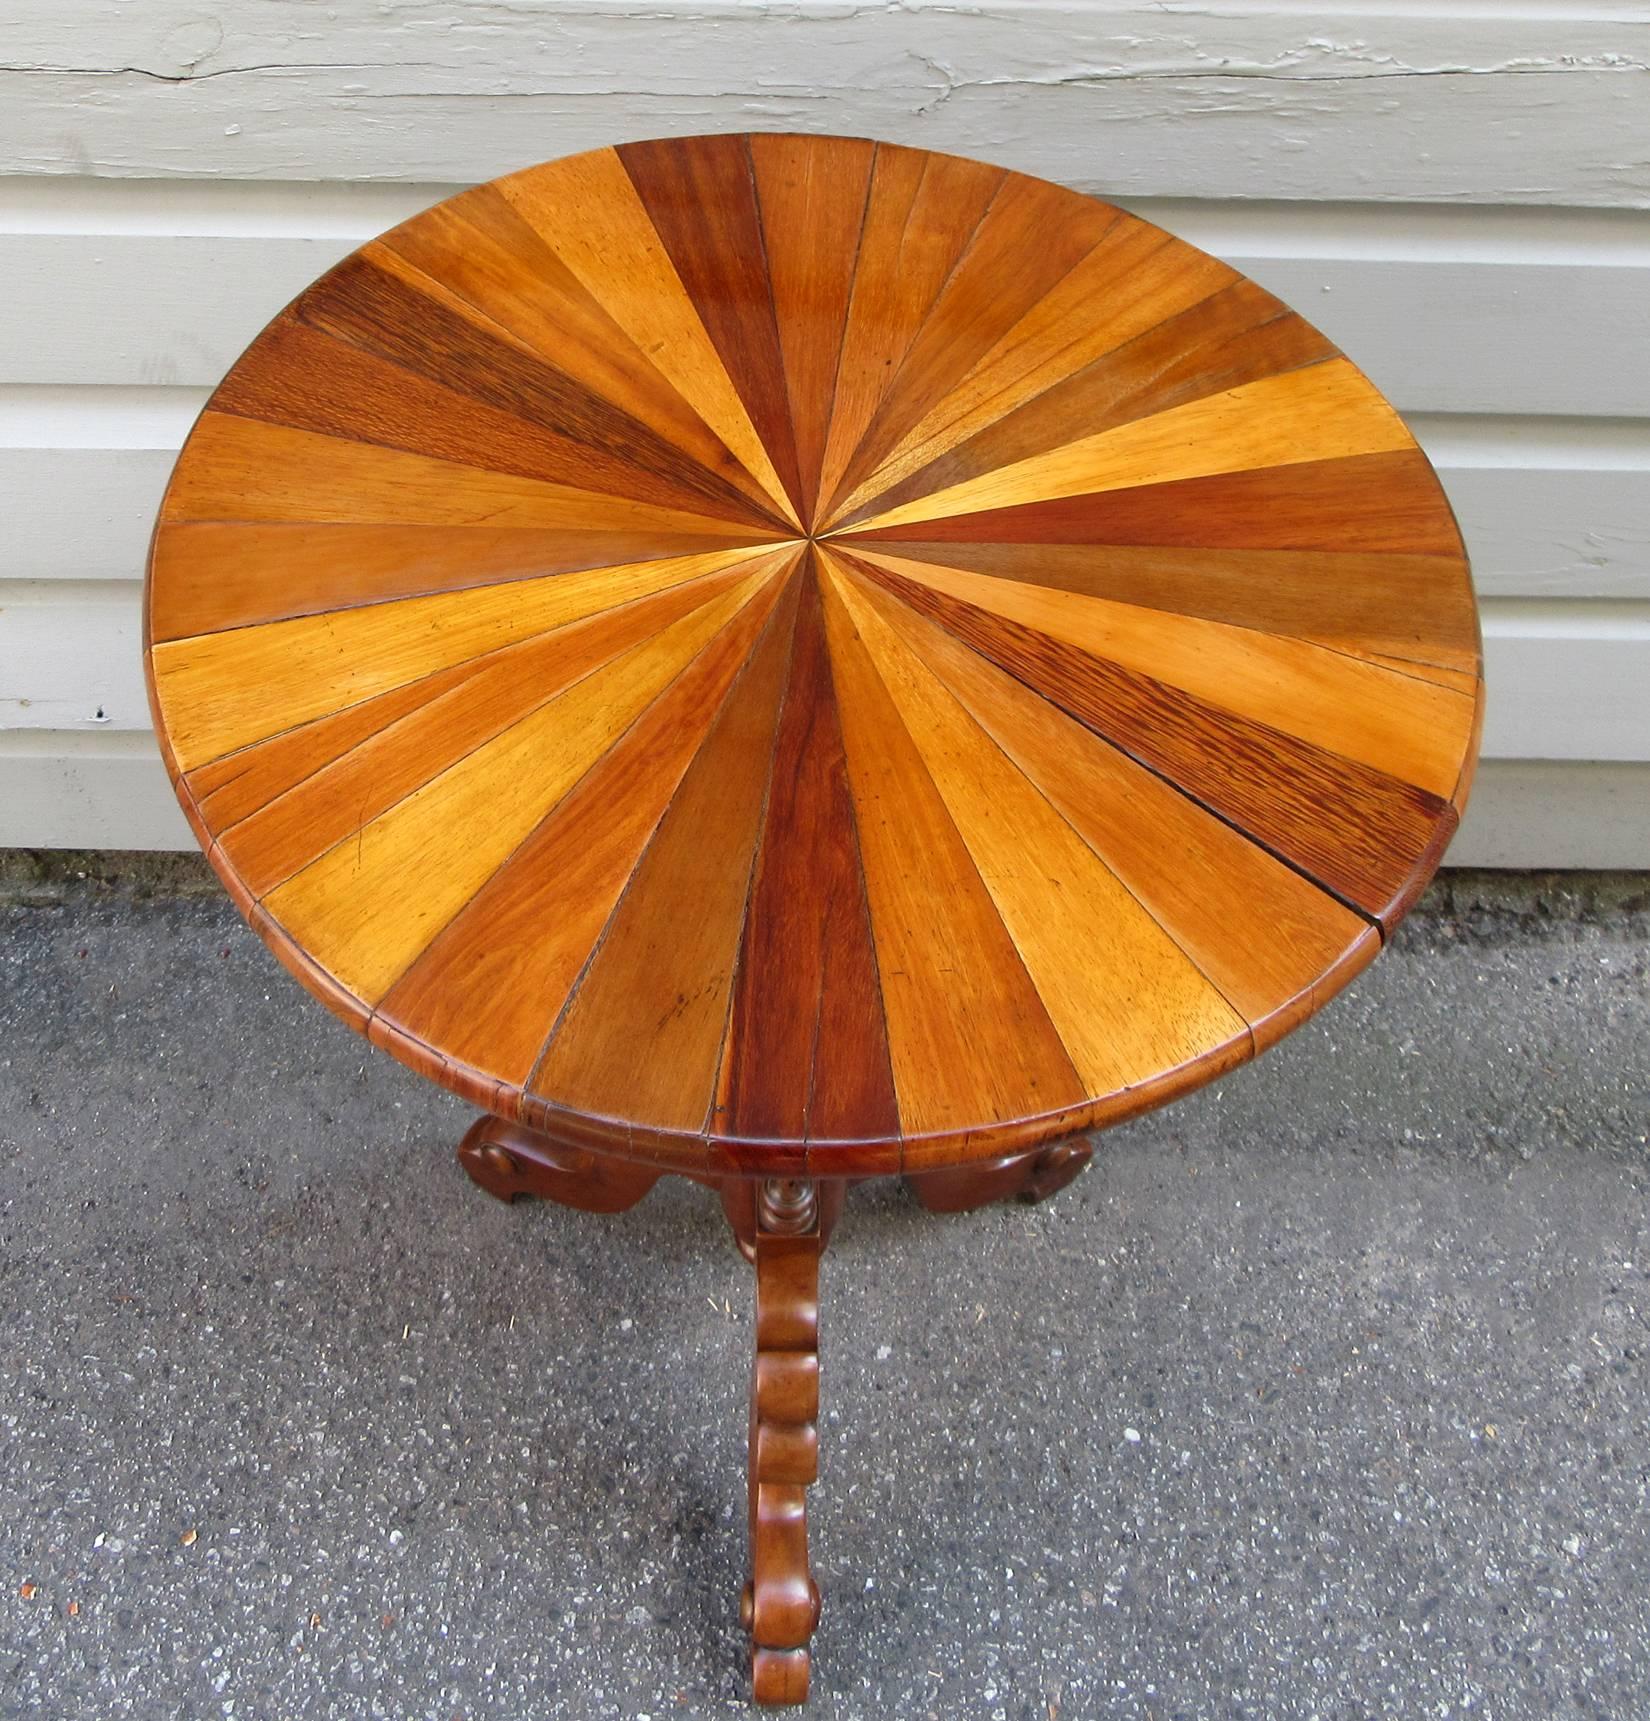 British Colonial 19th Century Tobagonian Specimen Wood Tripod Table Made for 1885 Exhibit For Sale